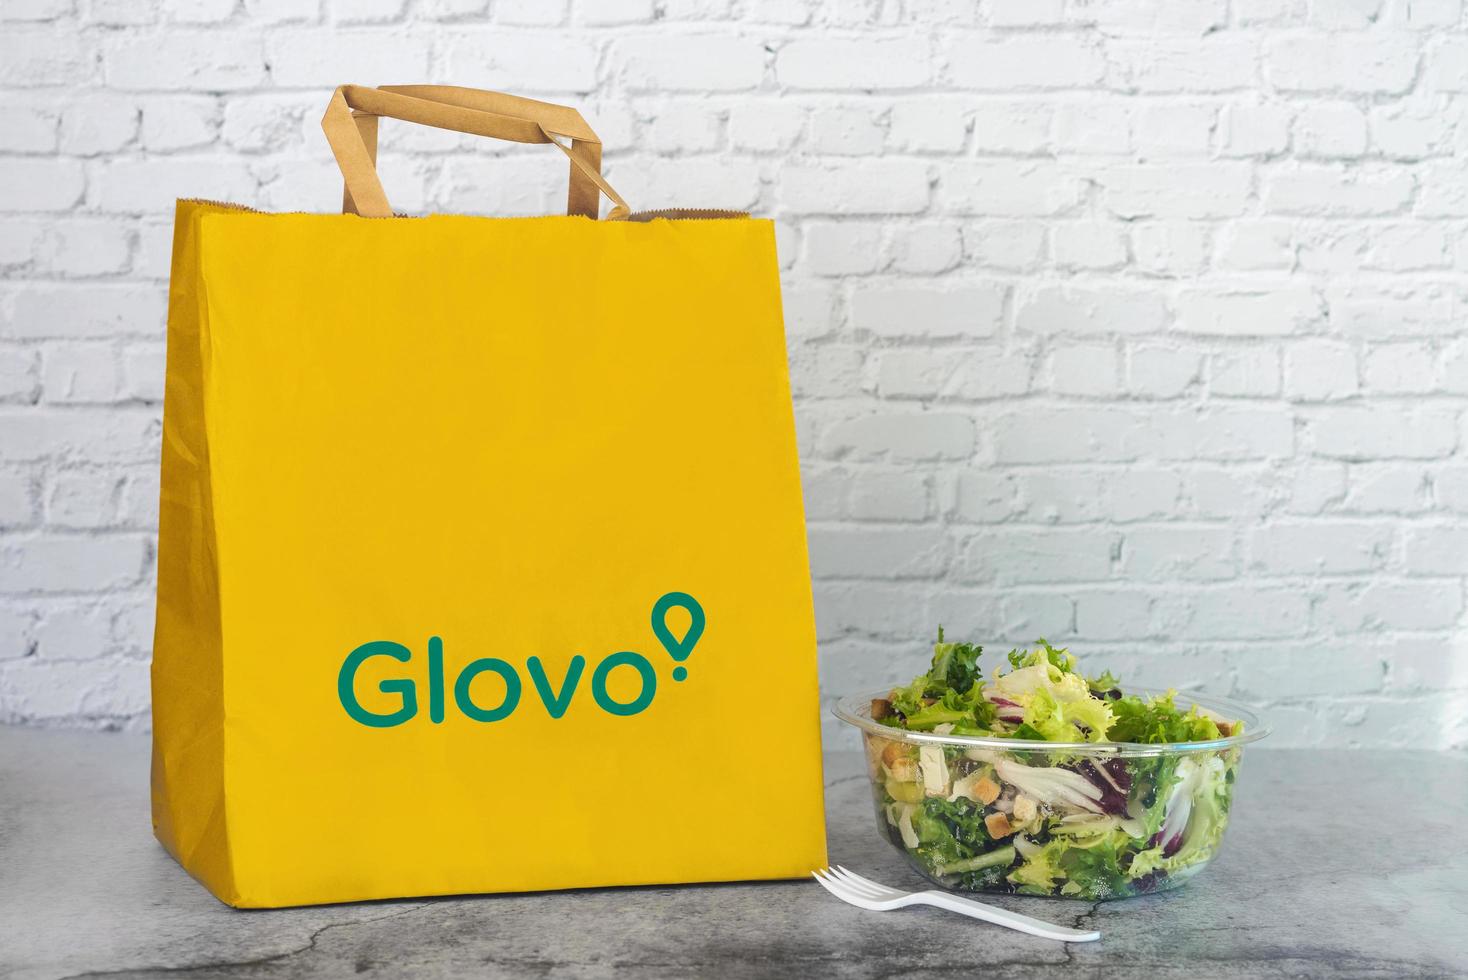 Glovo food paper delivery bag next to a salad photo